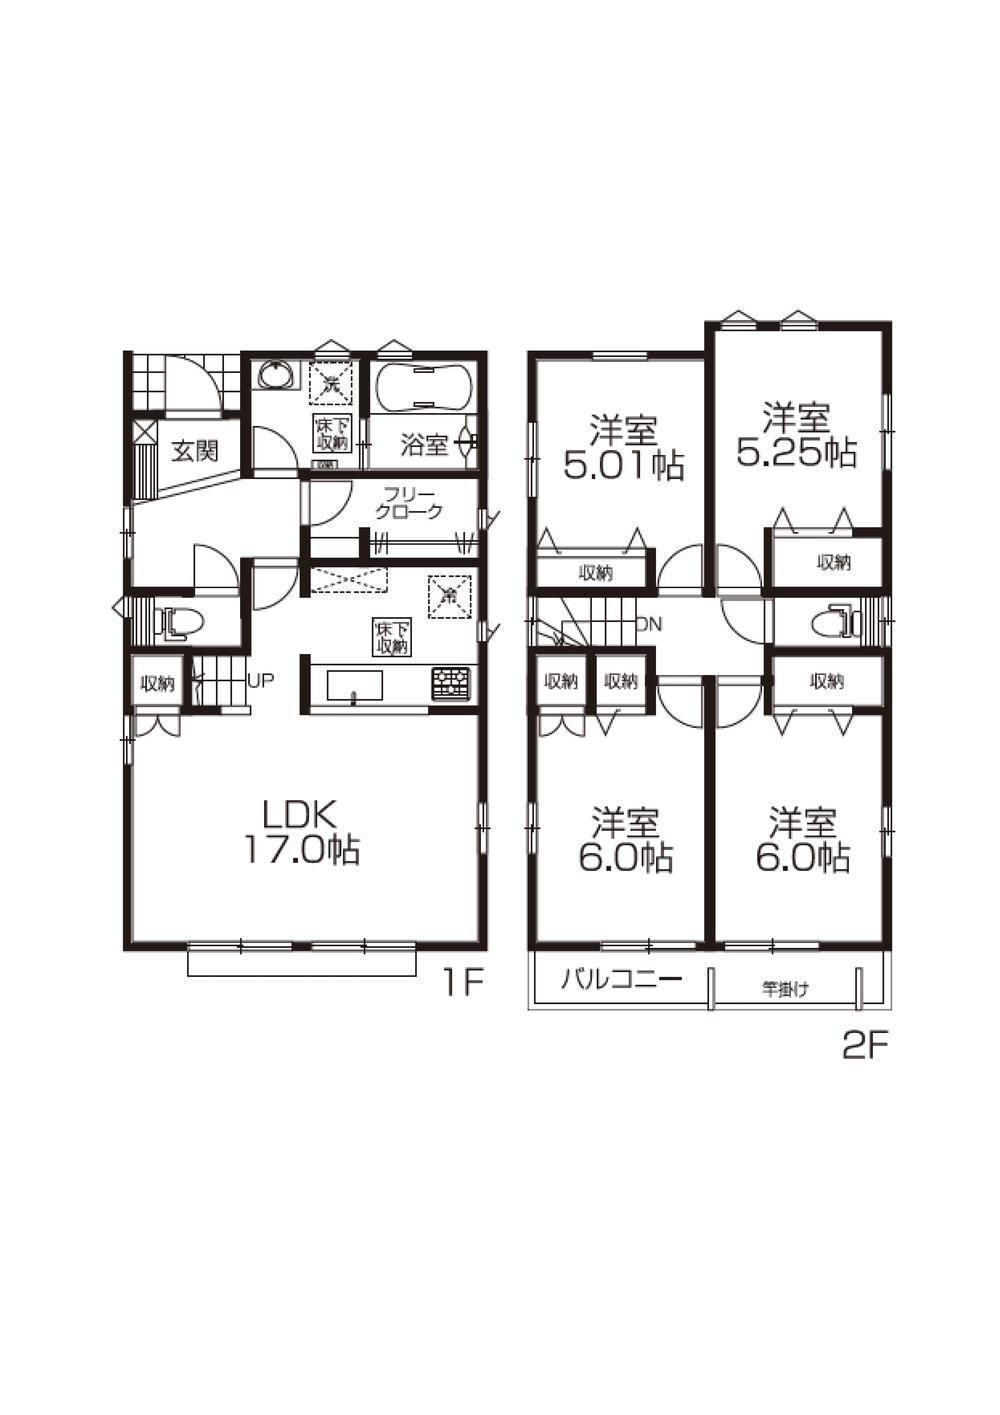 Floor plan. 37,200,000 yen, 4LDK, Land area 128.92 sq m , Building area 98.94 sq m popular living stairs  ☆ Prizes gift to the customer's conclusion of a contract (please contact us for more details) ☆ 